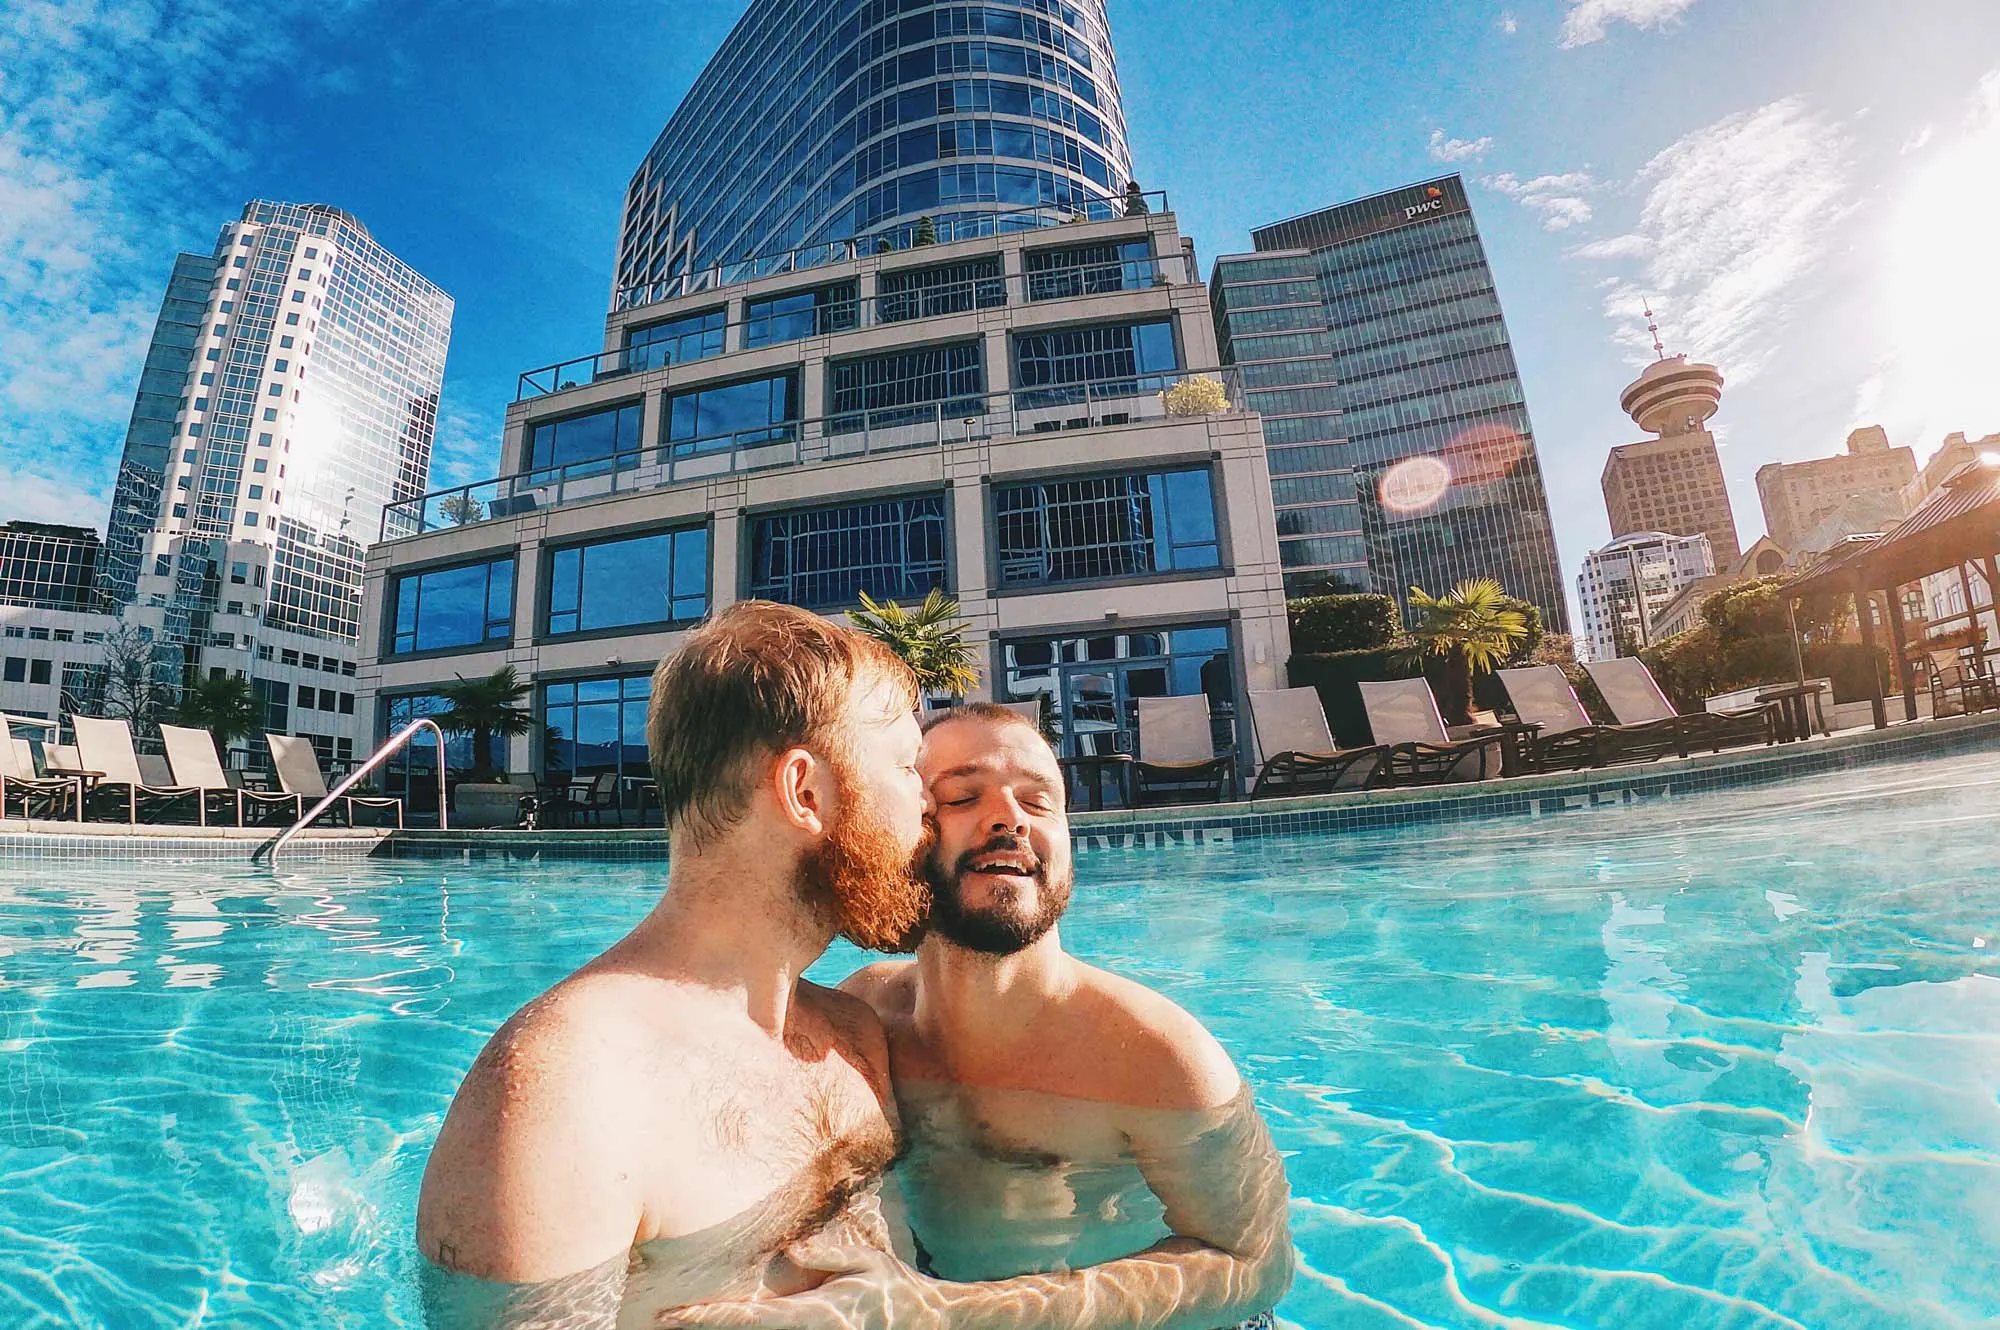 Gay Travel Blogger Whistler Pride Ski Festival Whistler Pride Gay Skiwoche A Gay Kiss in the Rooftop Pool of the Fairmont Waterfront after Whistler Pride and Ski Festival 2019 © Coupleofmen.com